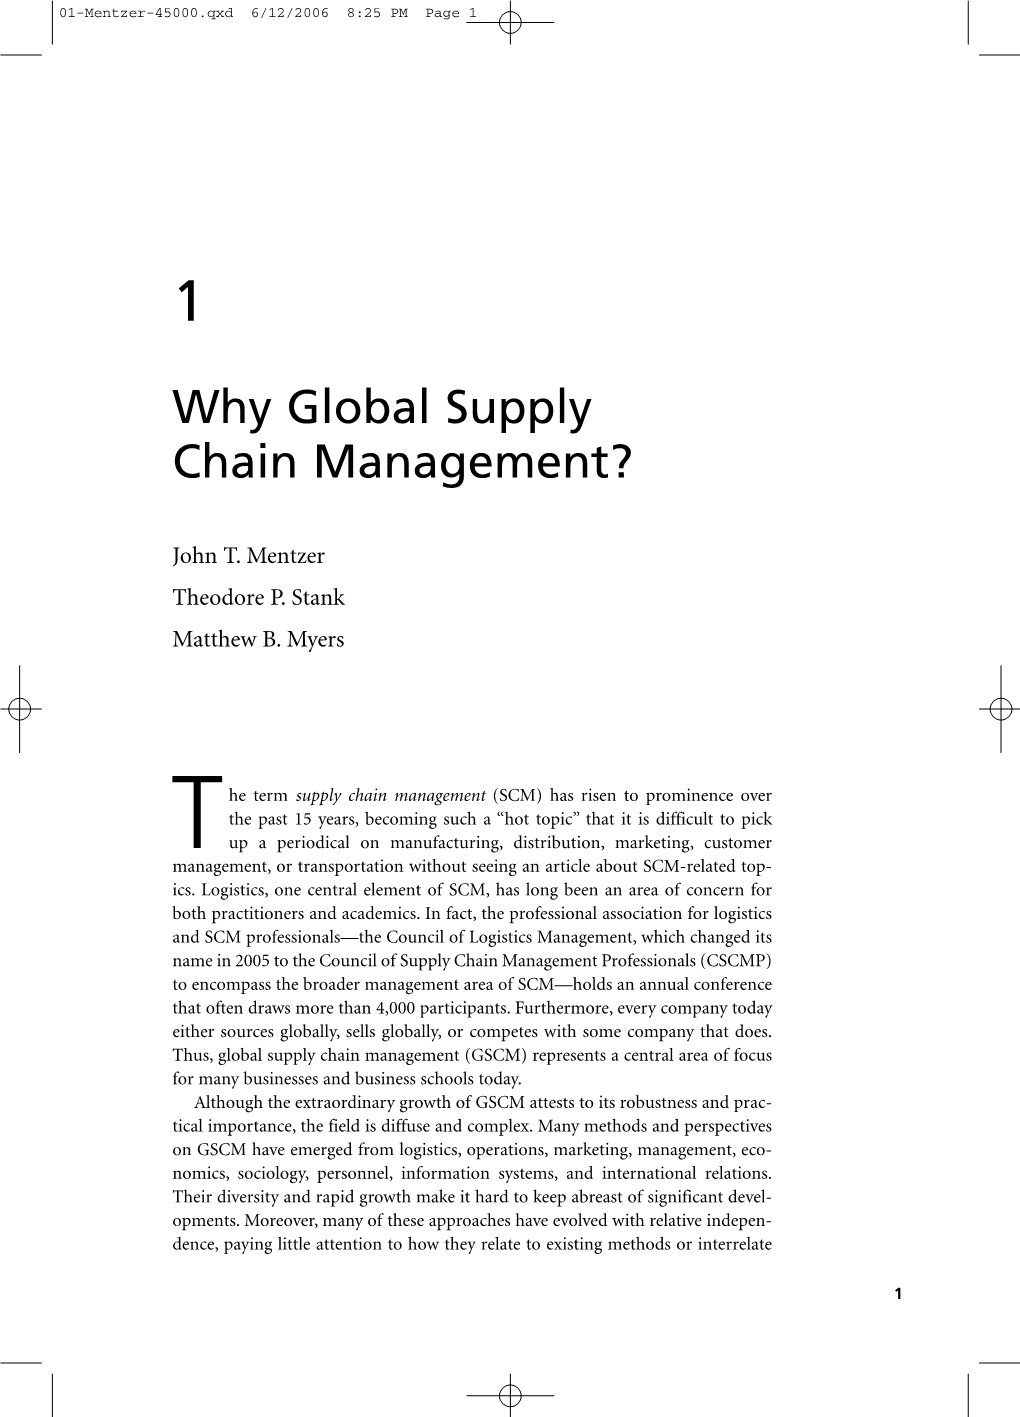 essay topics for supply chain management